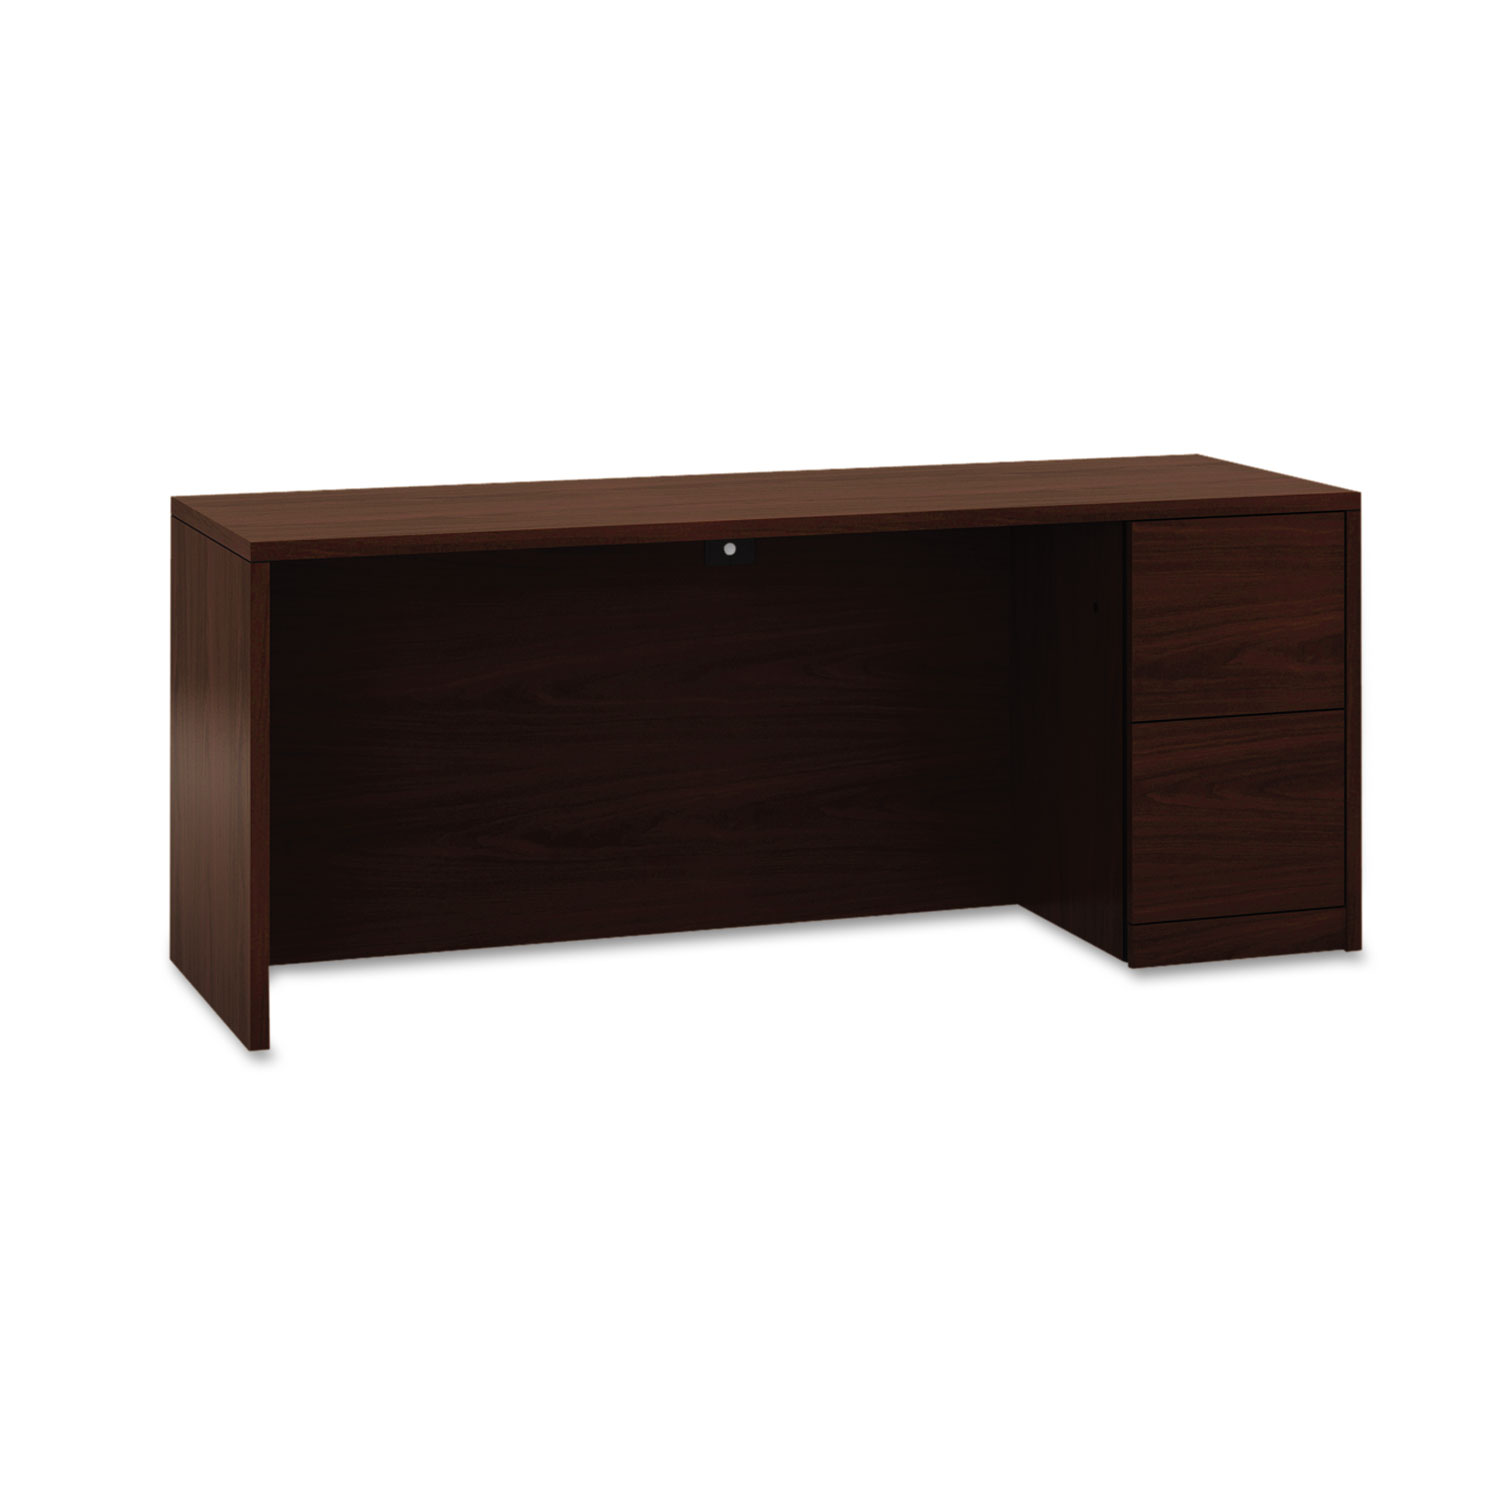 10500 Series Full-Height Right Ped Credenza, 72 x 24 x 29-1/2, Natural Maple